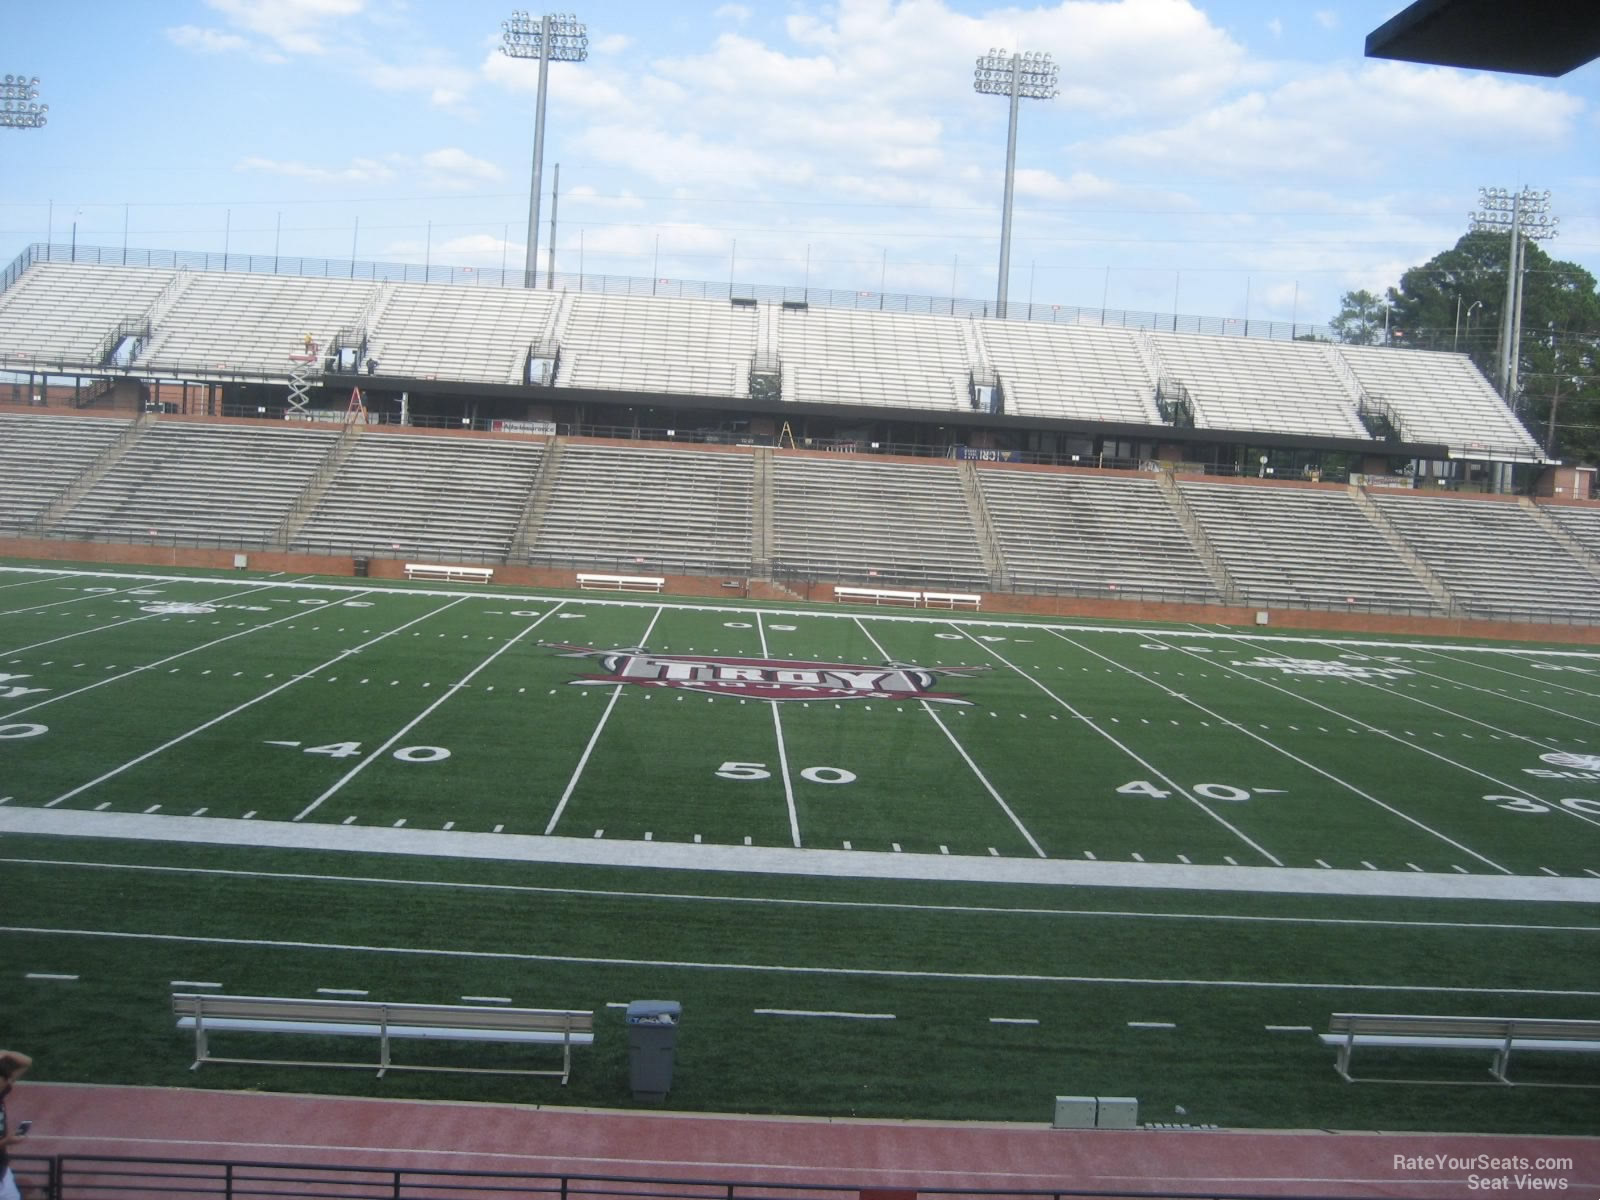 section 108, row 15 seat view  - troy memorial stadium